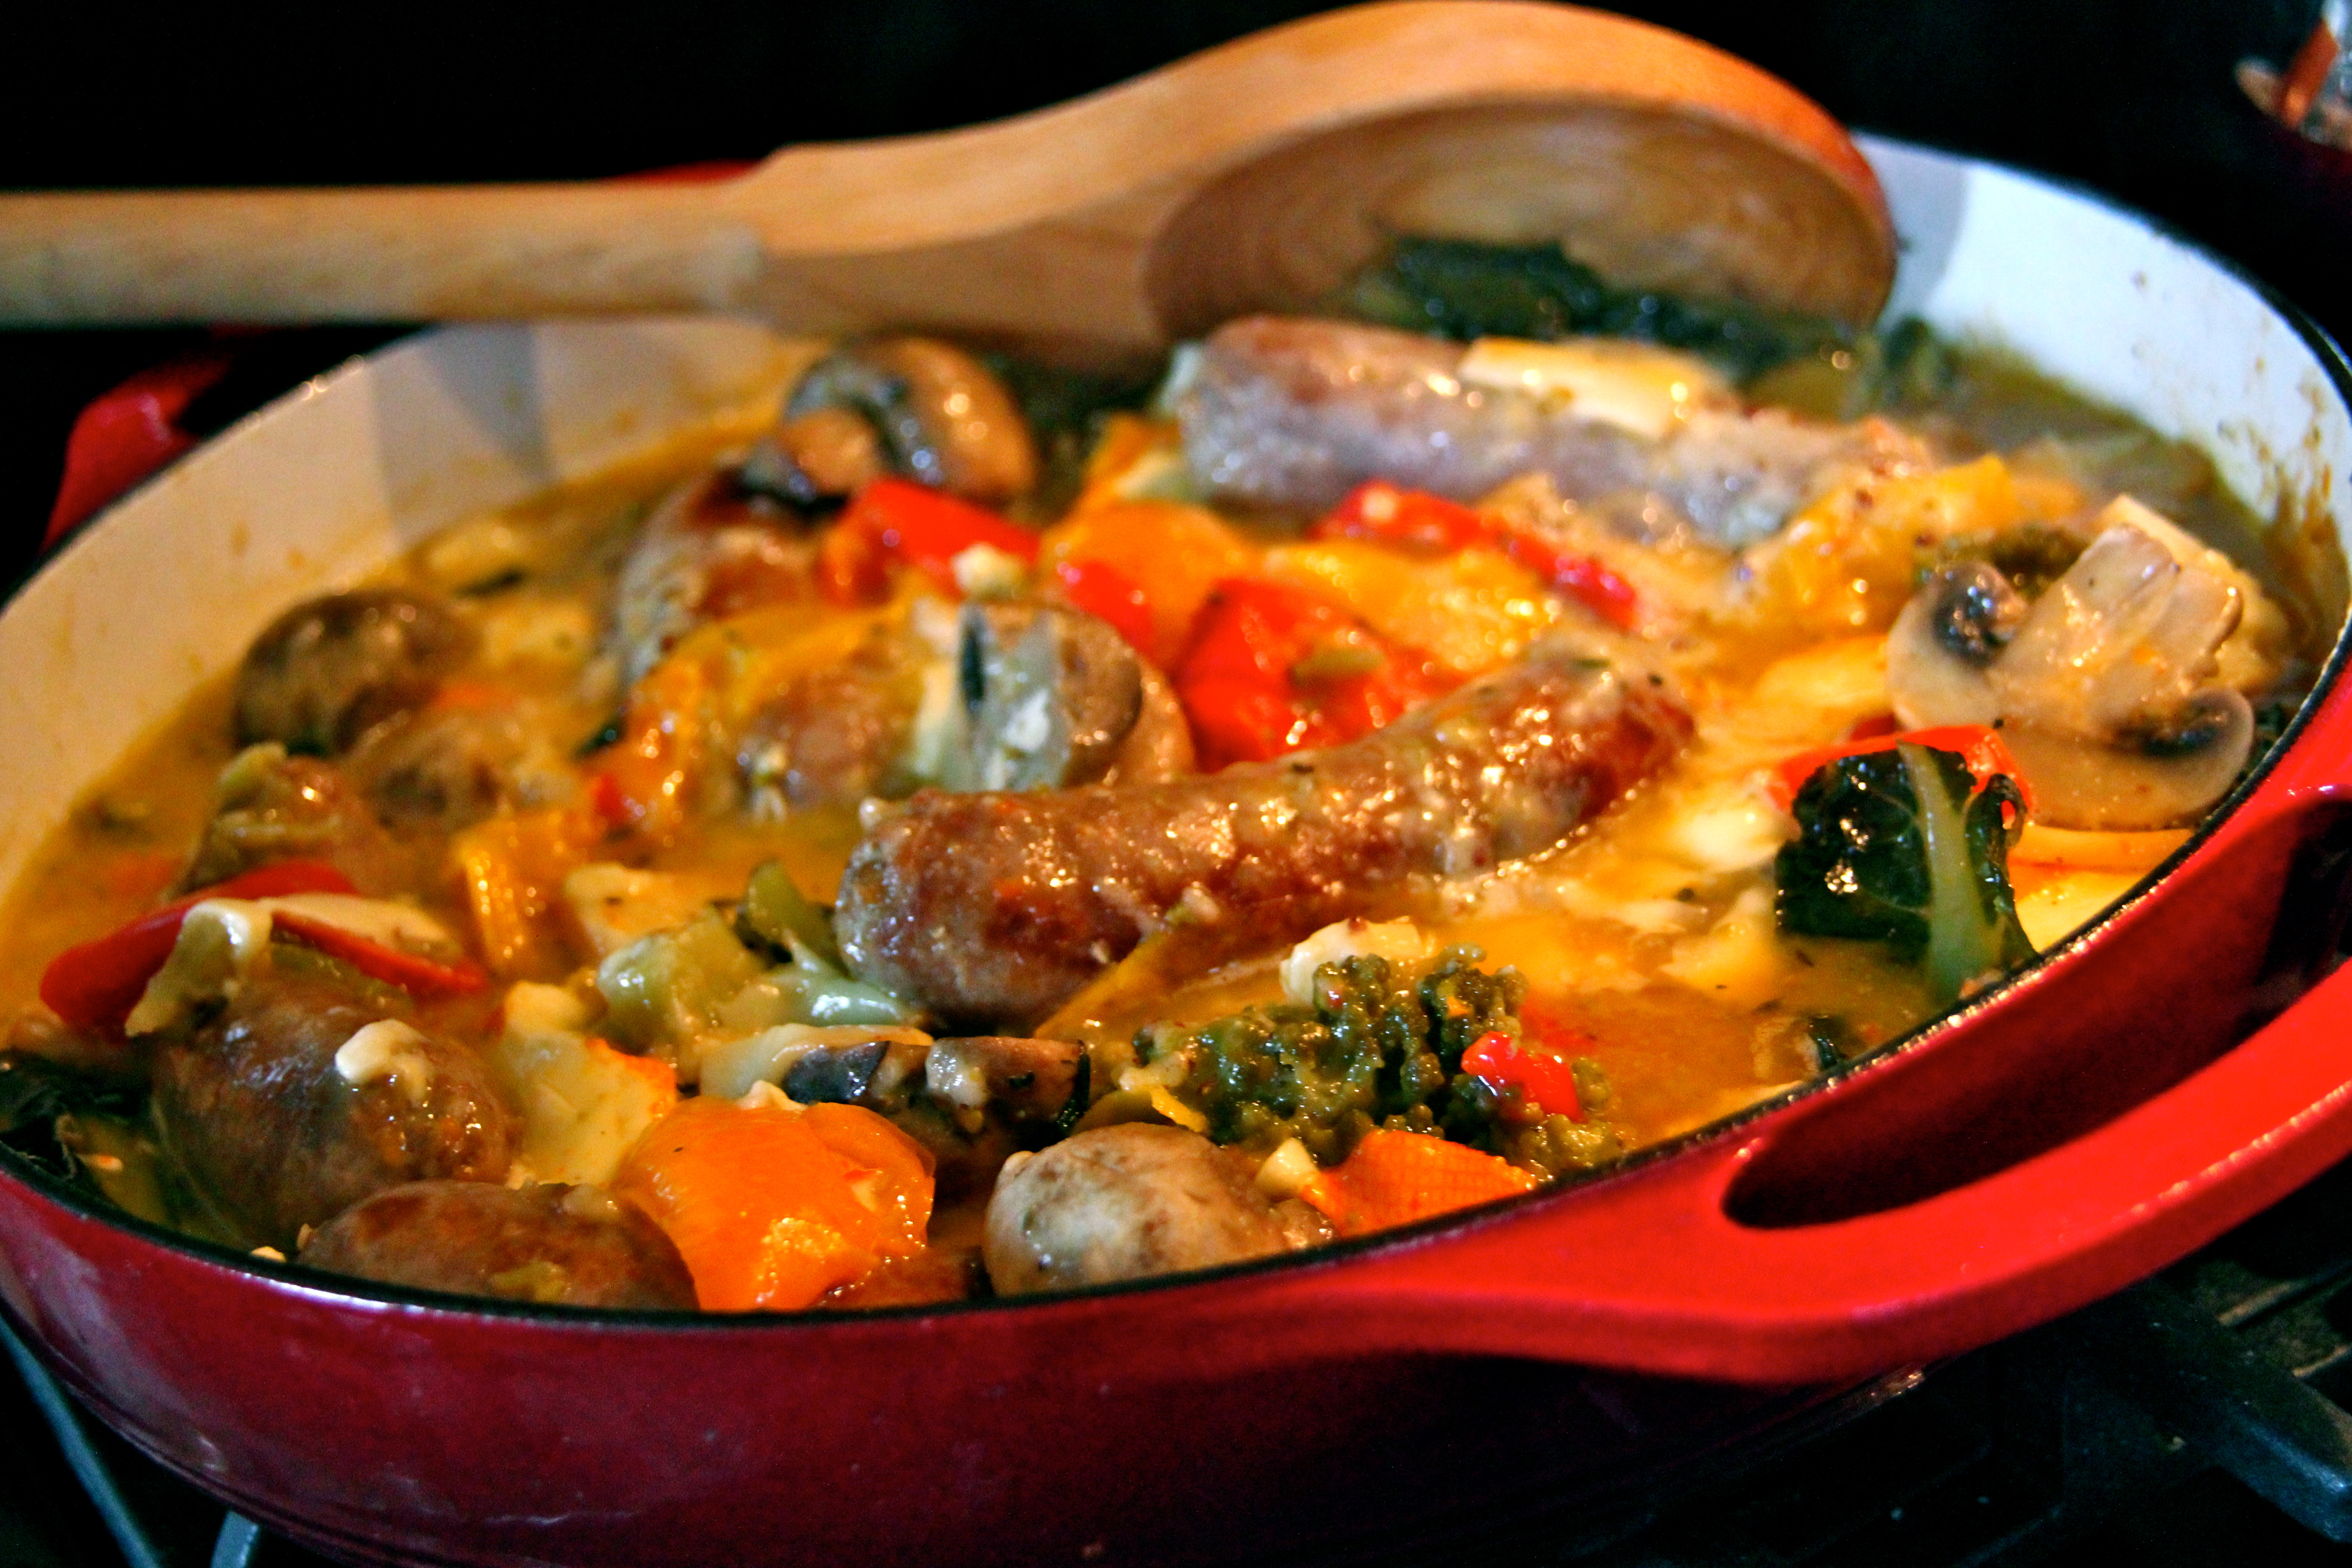 Summer Vegetables , Sausage, French cuisine, easy one pot meal